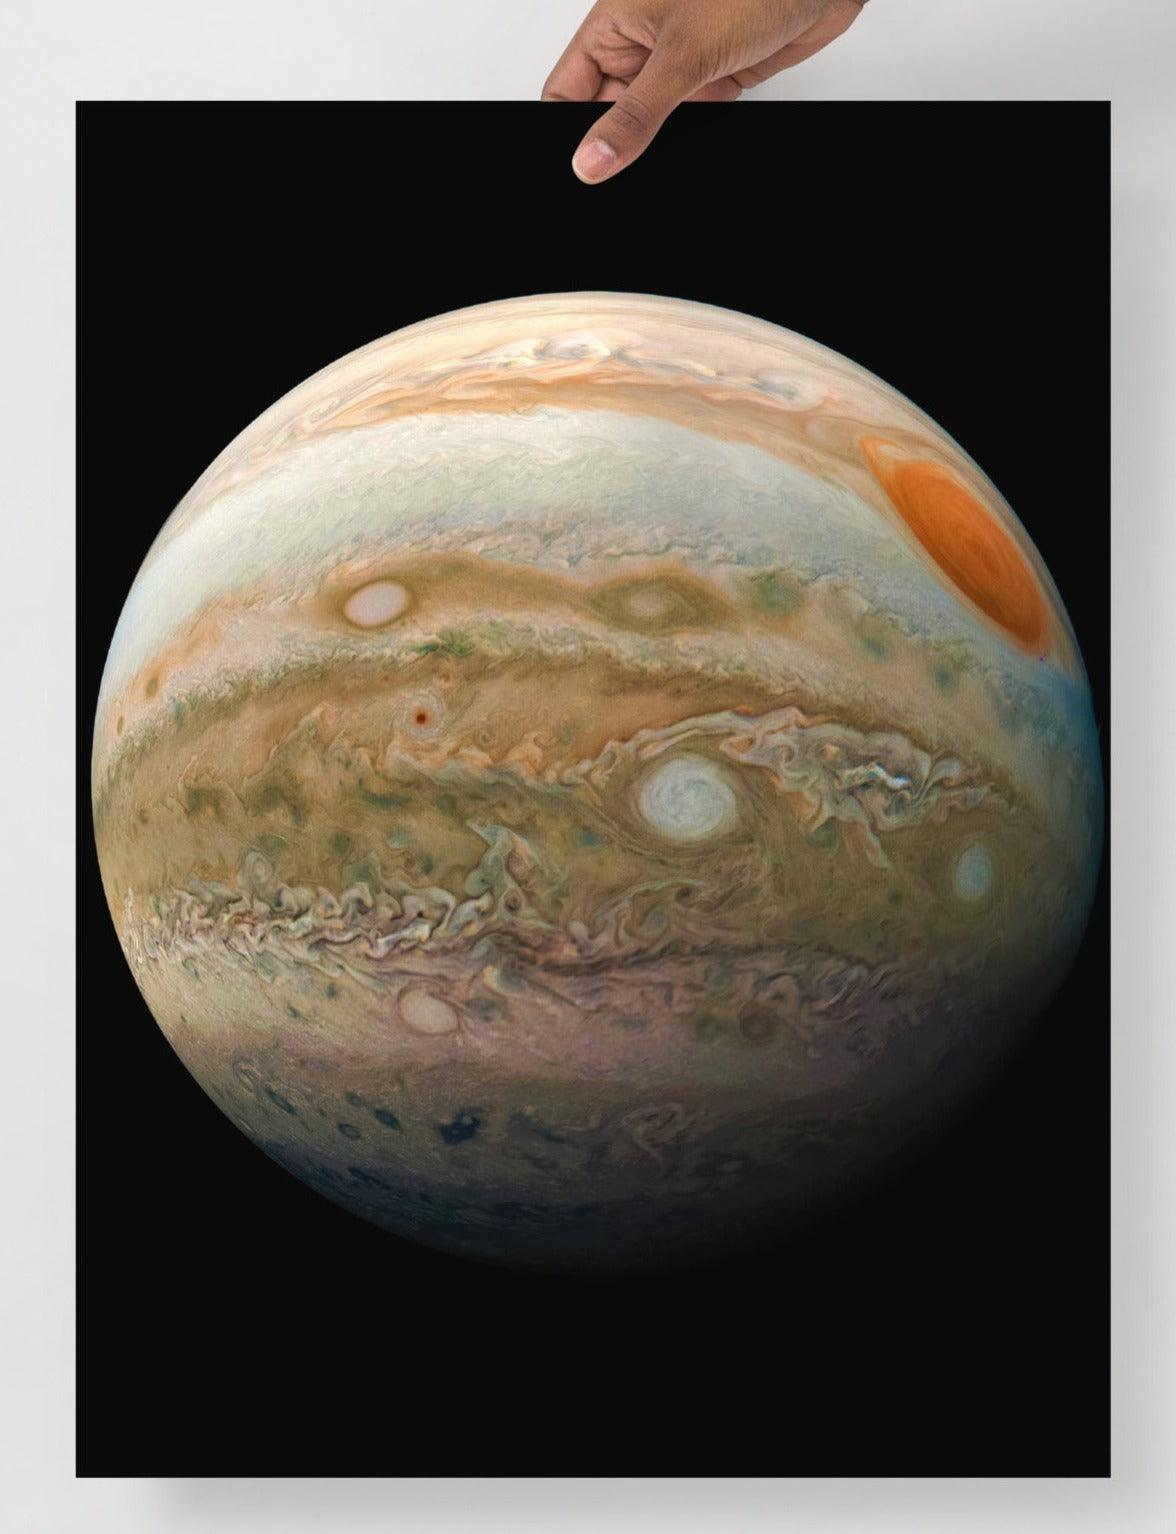 A Planet Jupiter From the Juno Spacecraft  poster on a plain backdrop in size 18x24”.